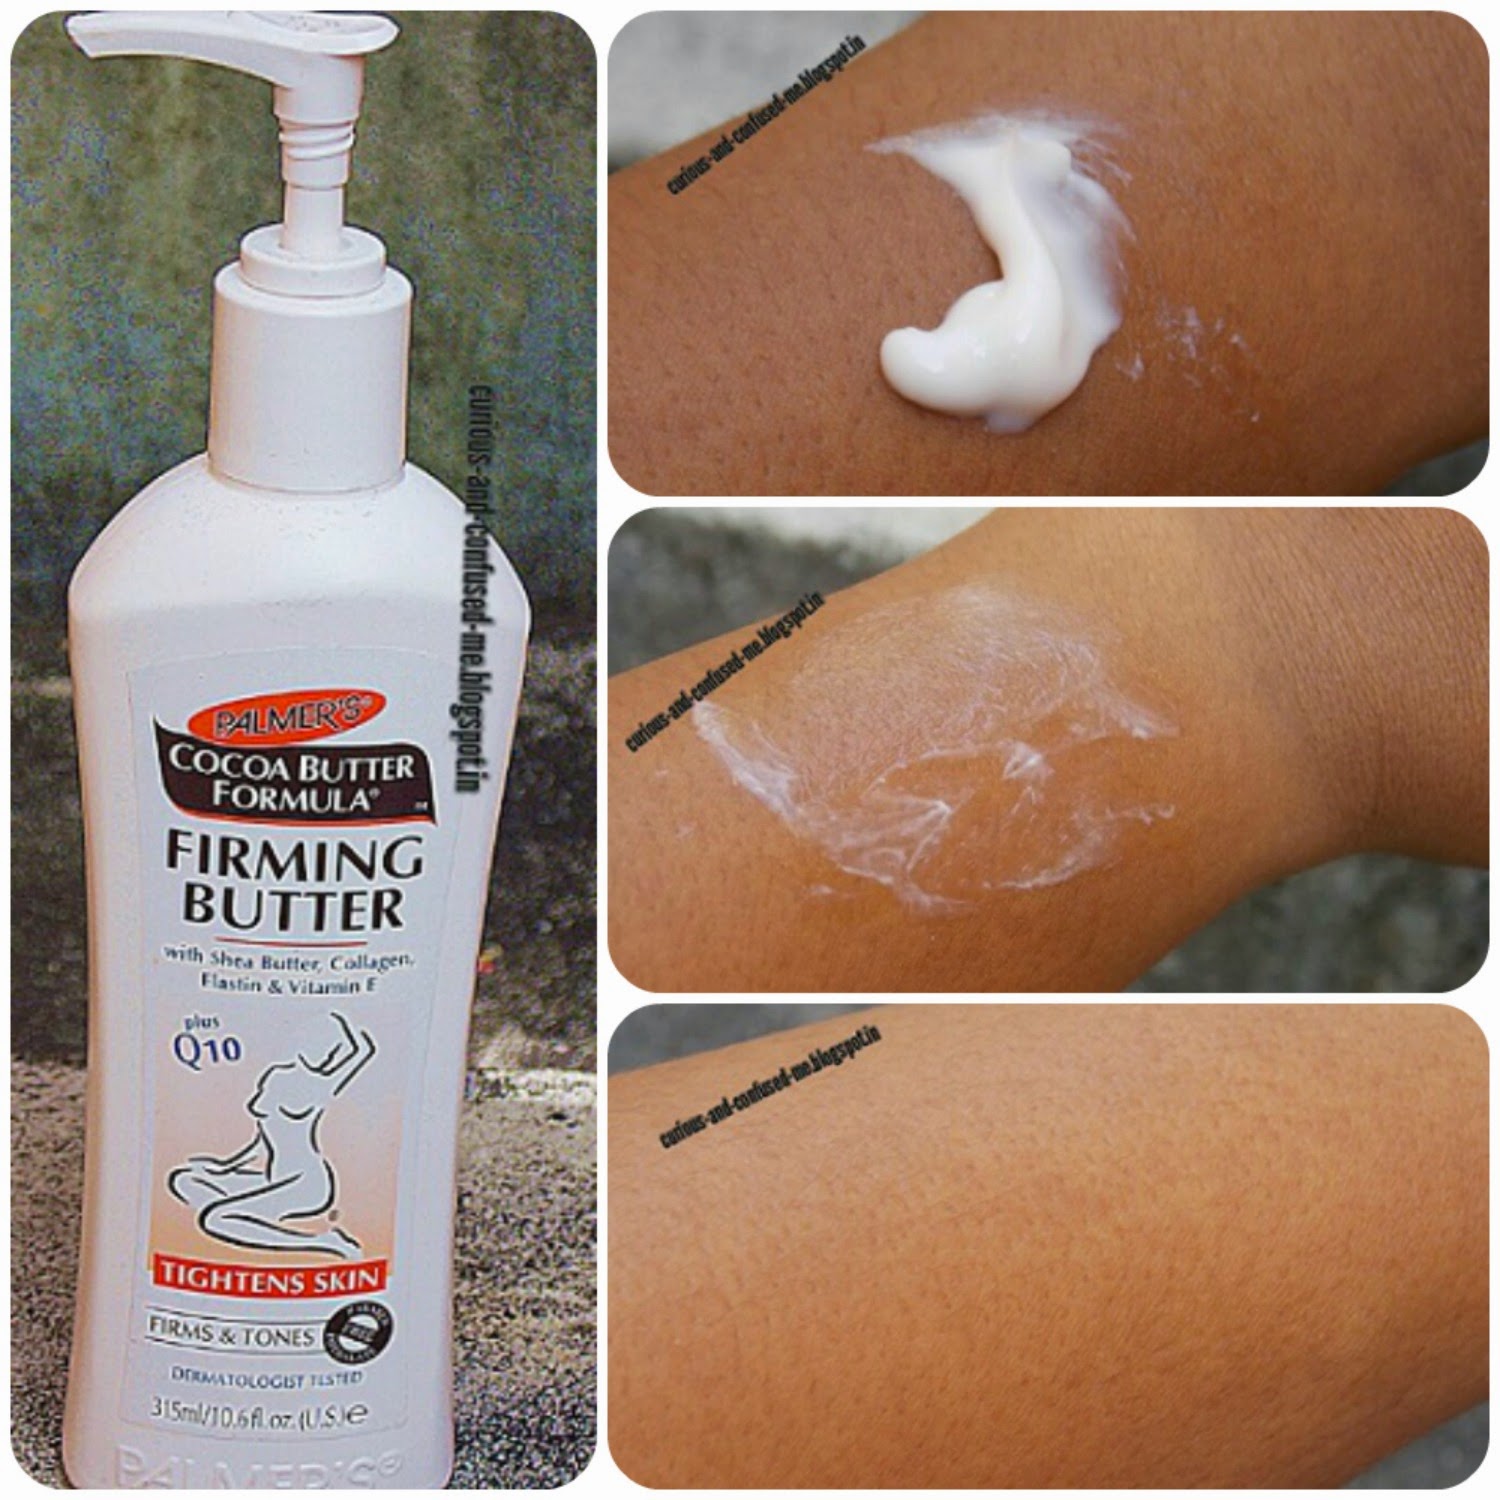 Palmers Cocoa Butter review, Palmers Cocoa Butter for firming toning, effects of Palmers Cocoa Butter, Palmers Cocoa Butter firming butter review, Palmers Cocoa Butter  swatch, Firming body butter India, Body butter India